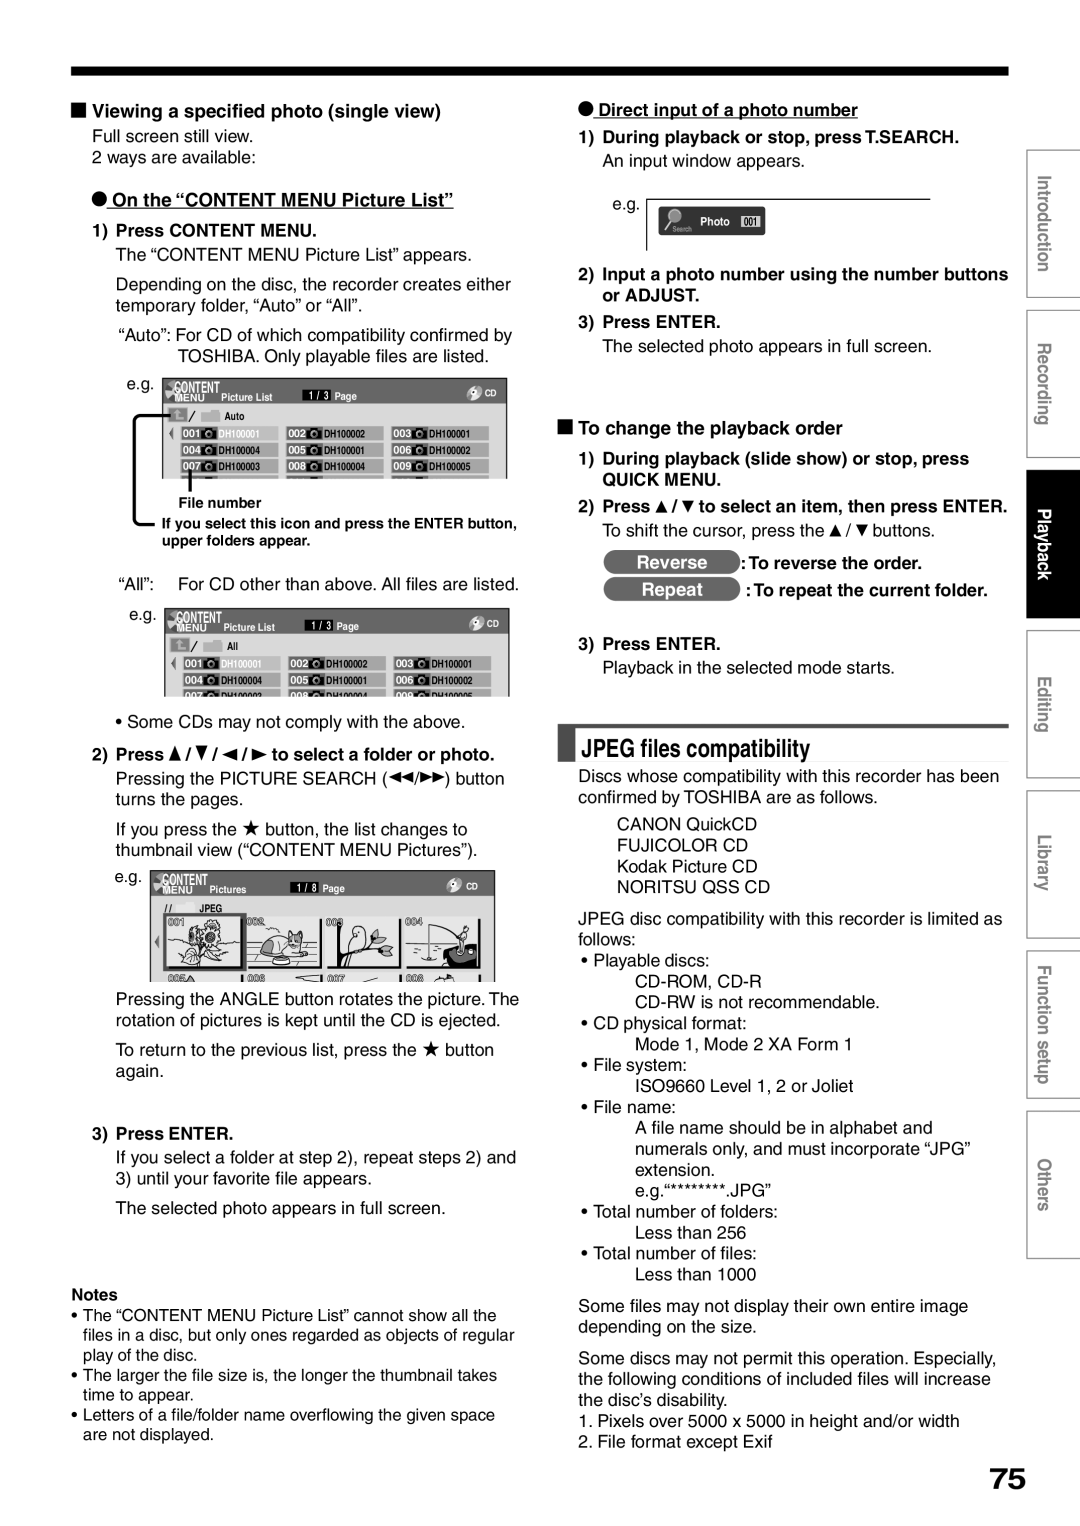 Toshiba D-R2SU, D-R2SC JPEG files compatibility, Viewing a specified photo single view, On the “CONTENT MENU Picture List” 